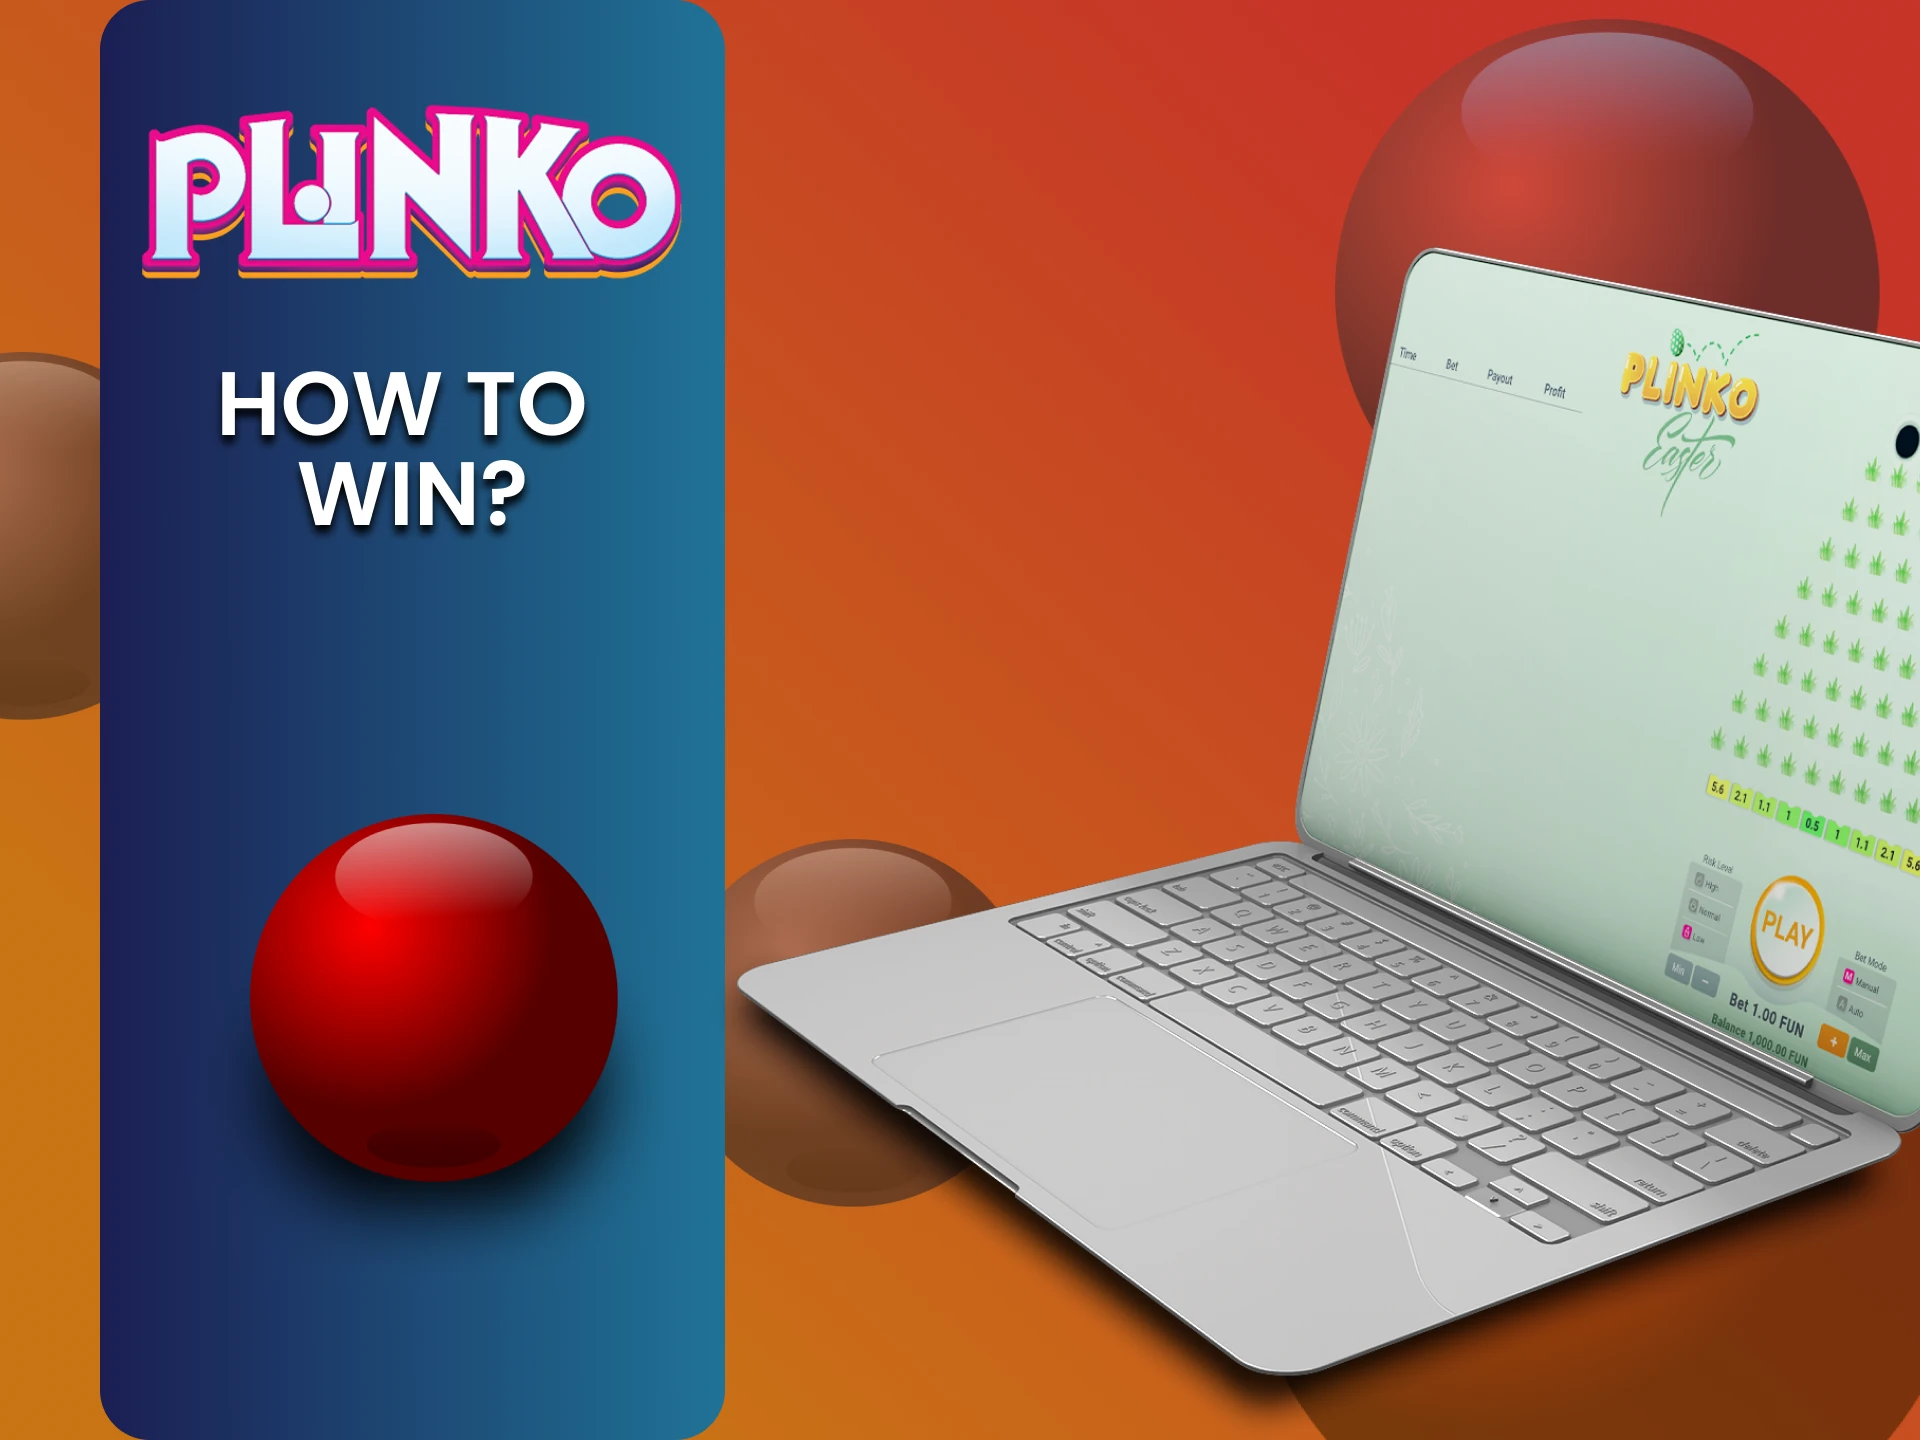 Get the knowledge you need to win at Plinko.